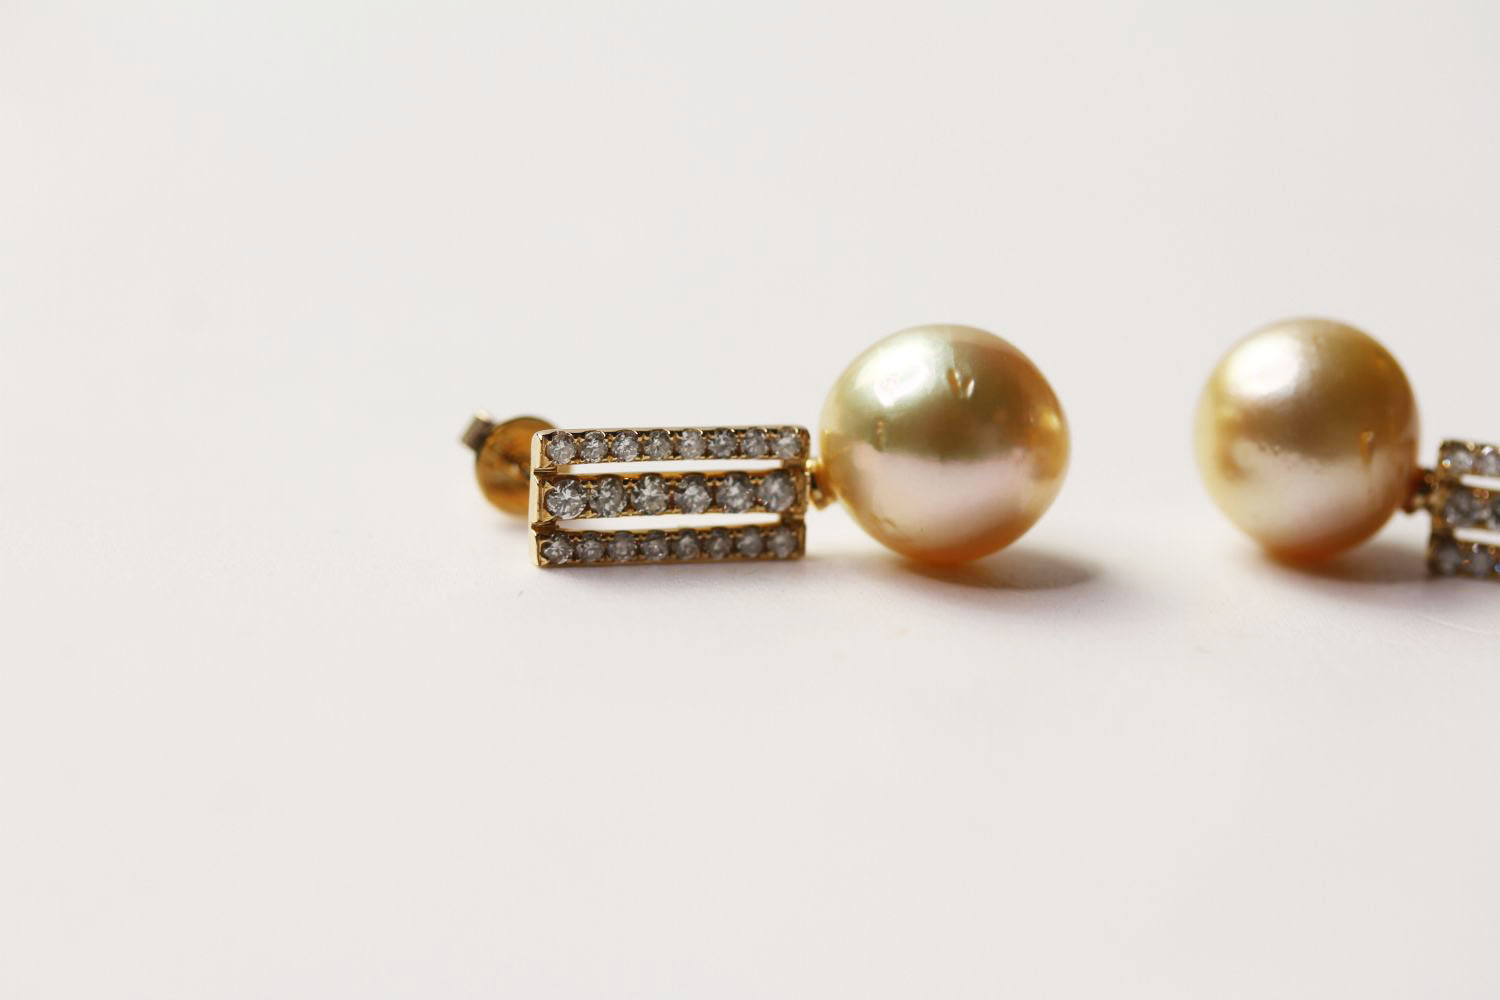 Pair Of Pearl & Diamond Earrings, set with 2 cultured south sea pearls, 44 round brilliant cut - Image 2 of 3